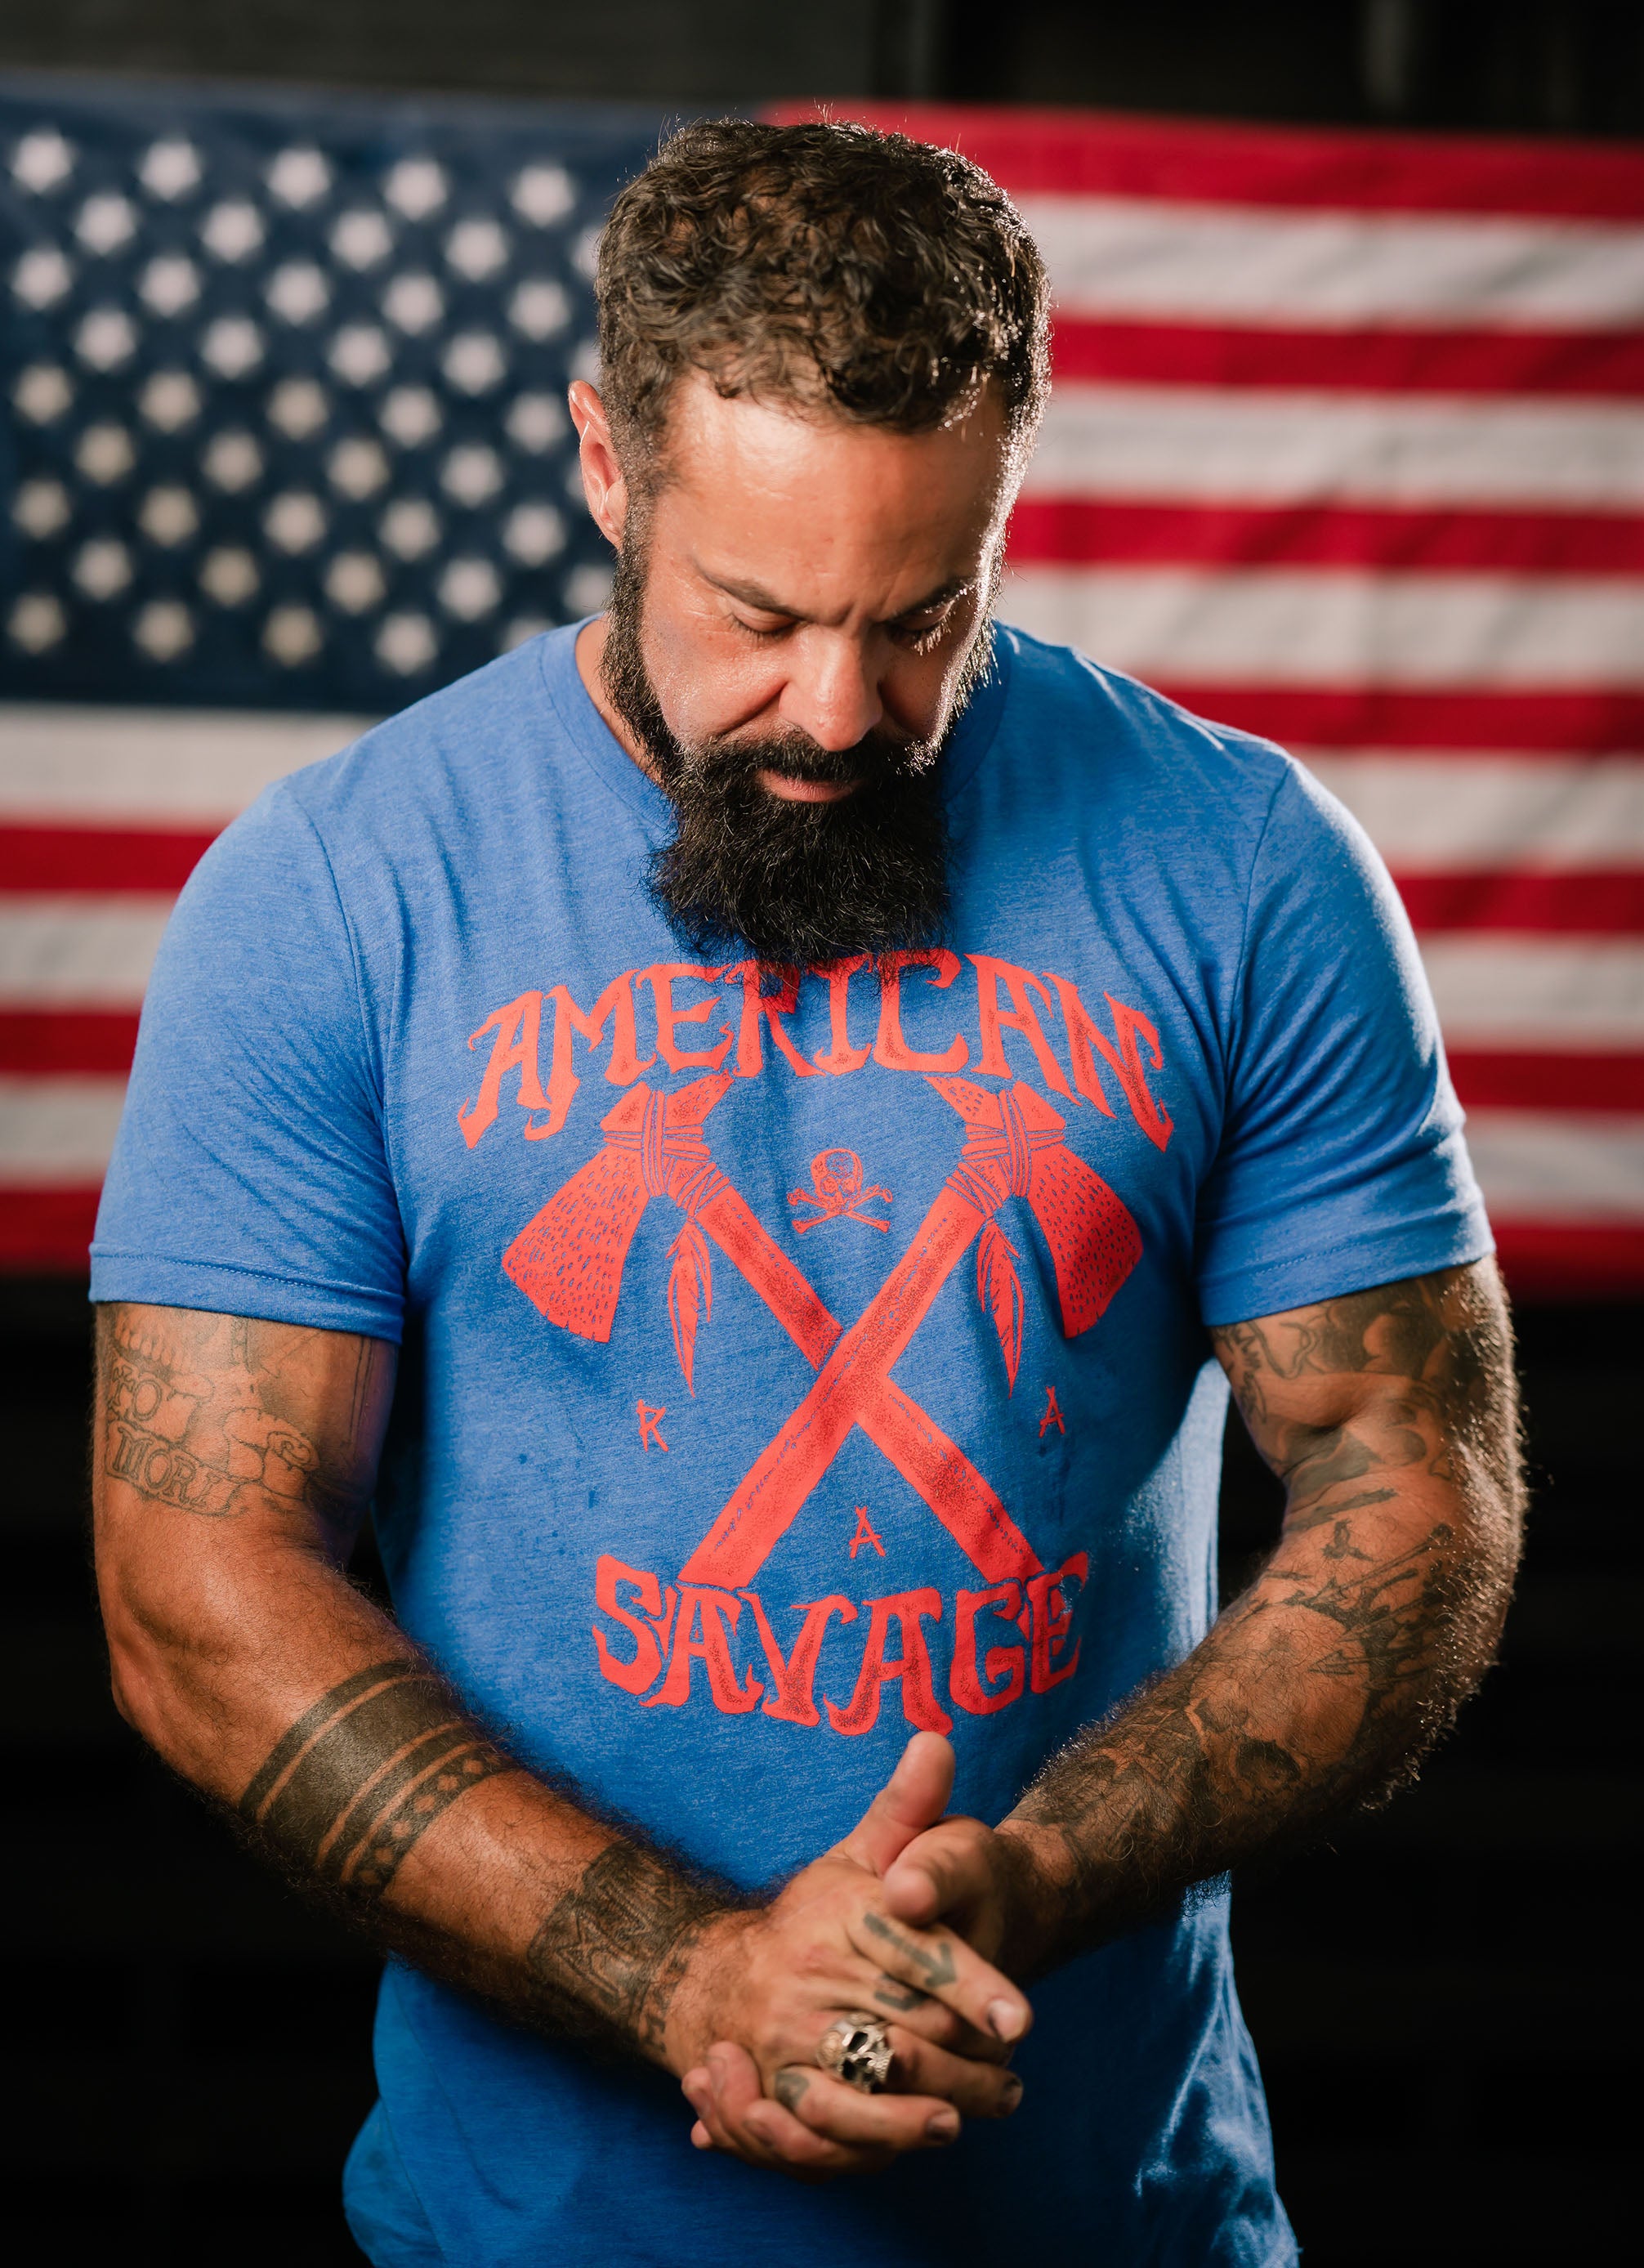 man wearing Rogue American savage shirt in front of American flag